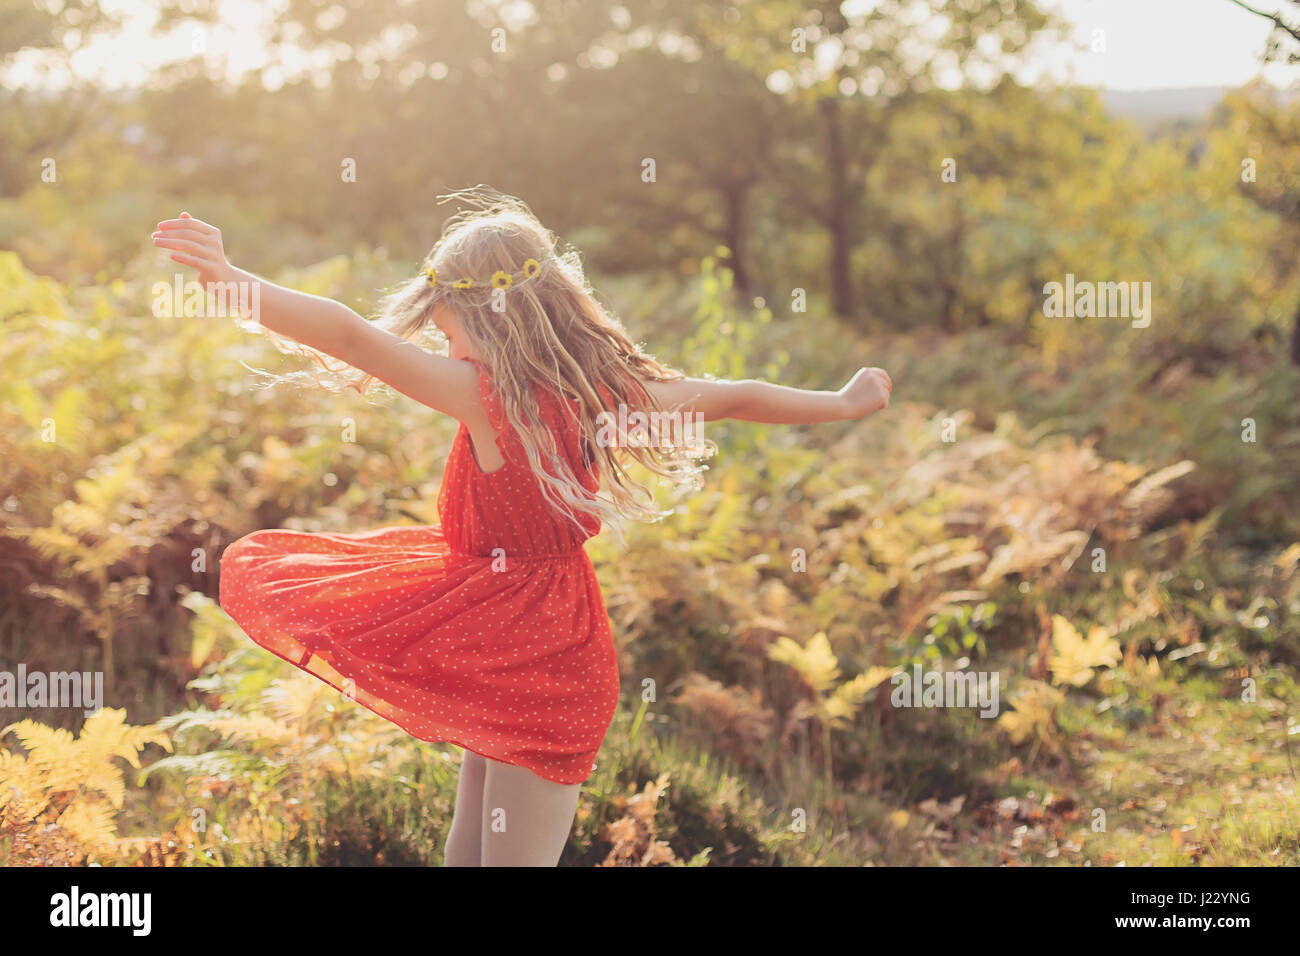 Little girl wearing red summer dress dancing in nature Stock Photo